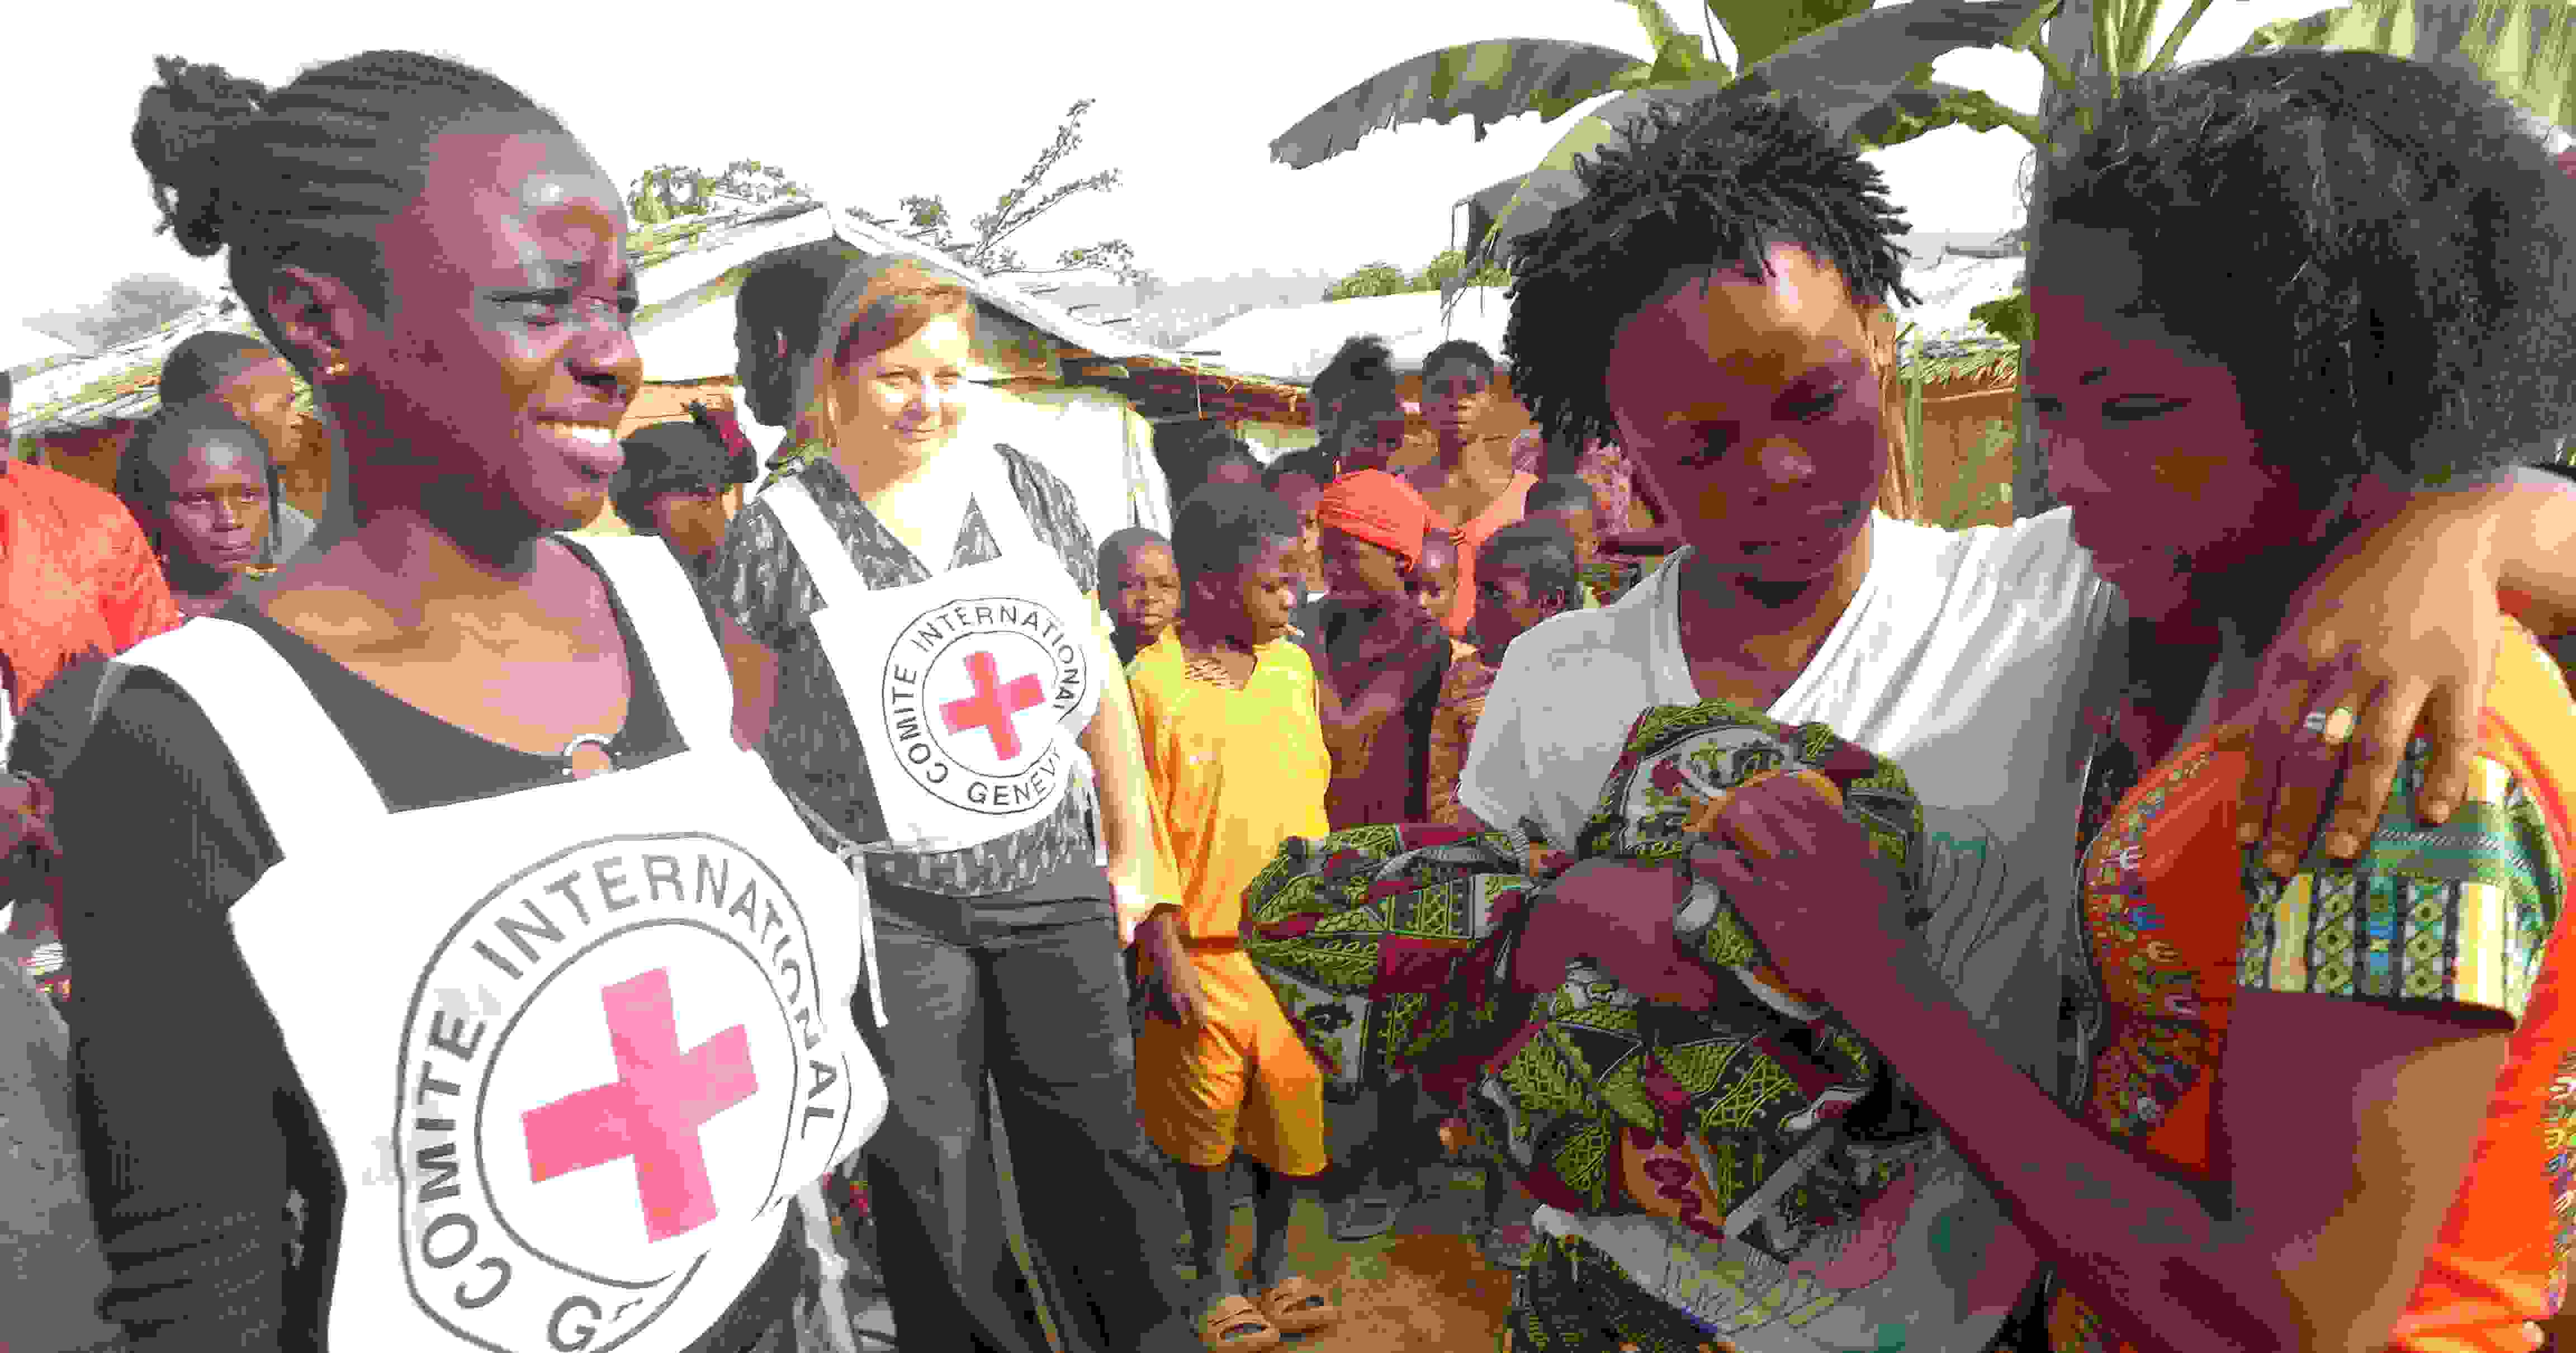 The Red Cross – Delivering messages in crisis areas